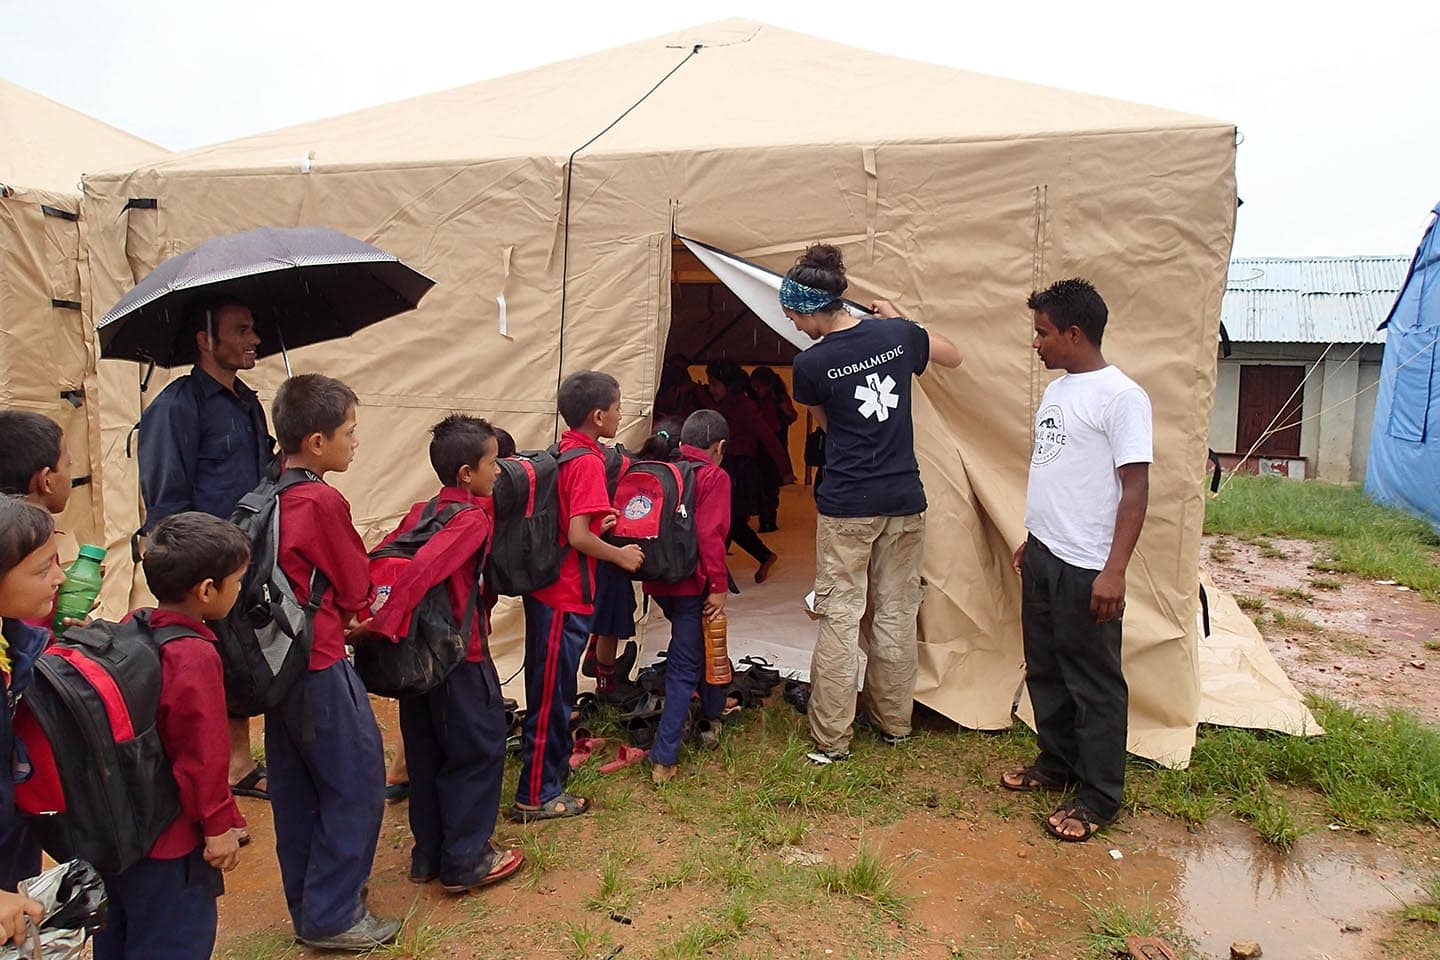 Rapid Response Team member leading a group of children into a Child Friendly Space constructed by GlobalMedic